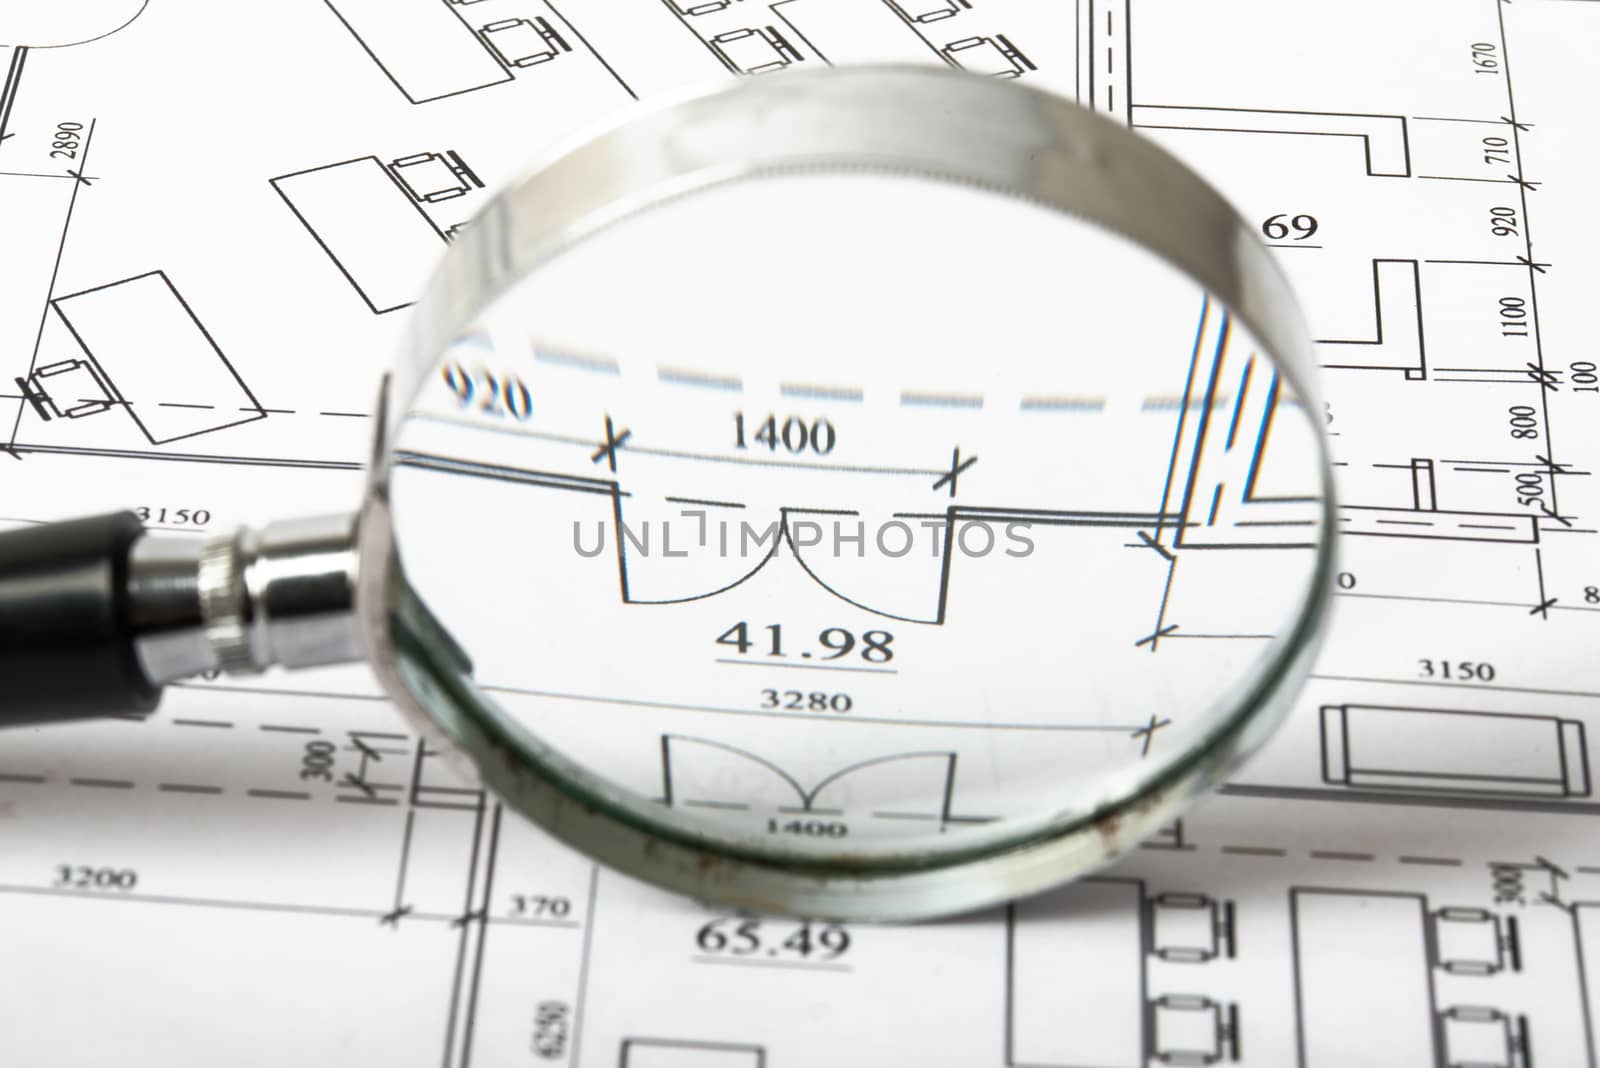 Magnifier on blueprints with figures, close up view